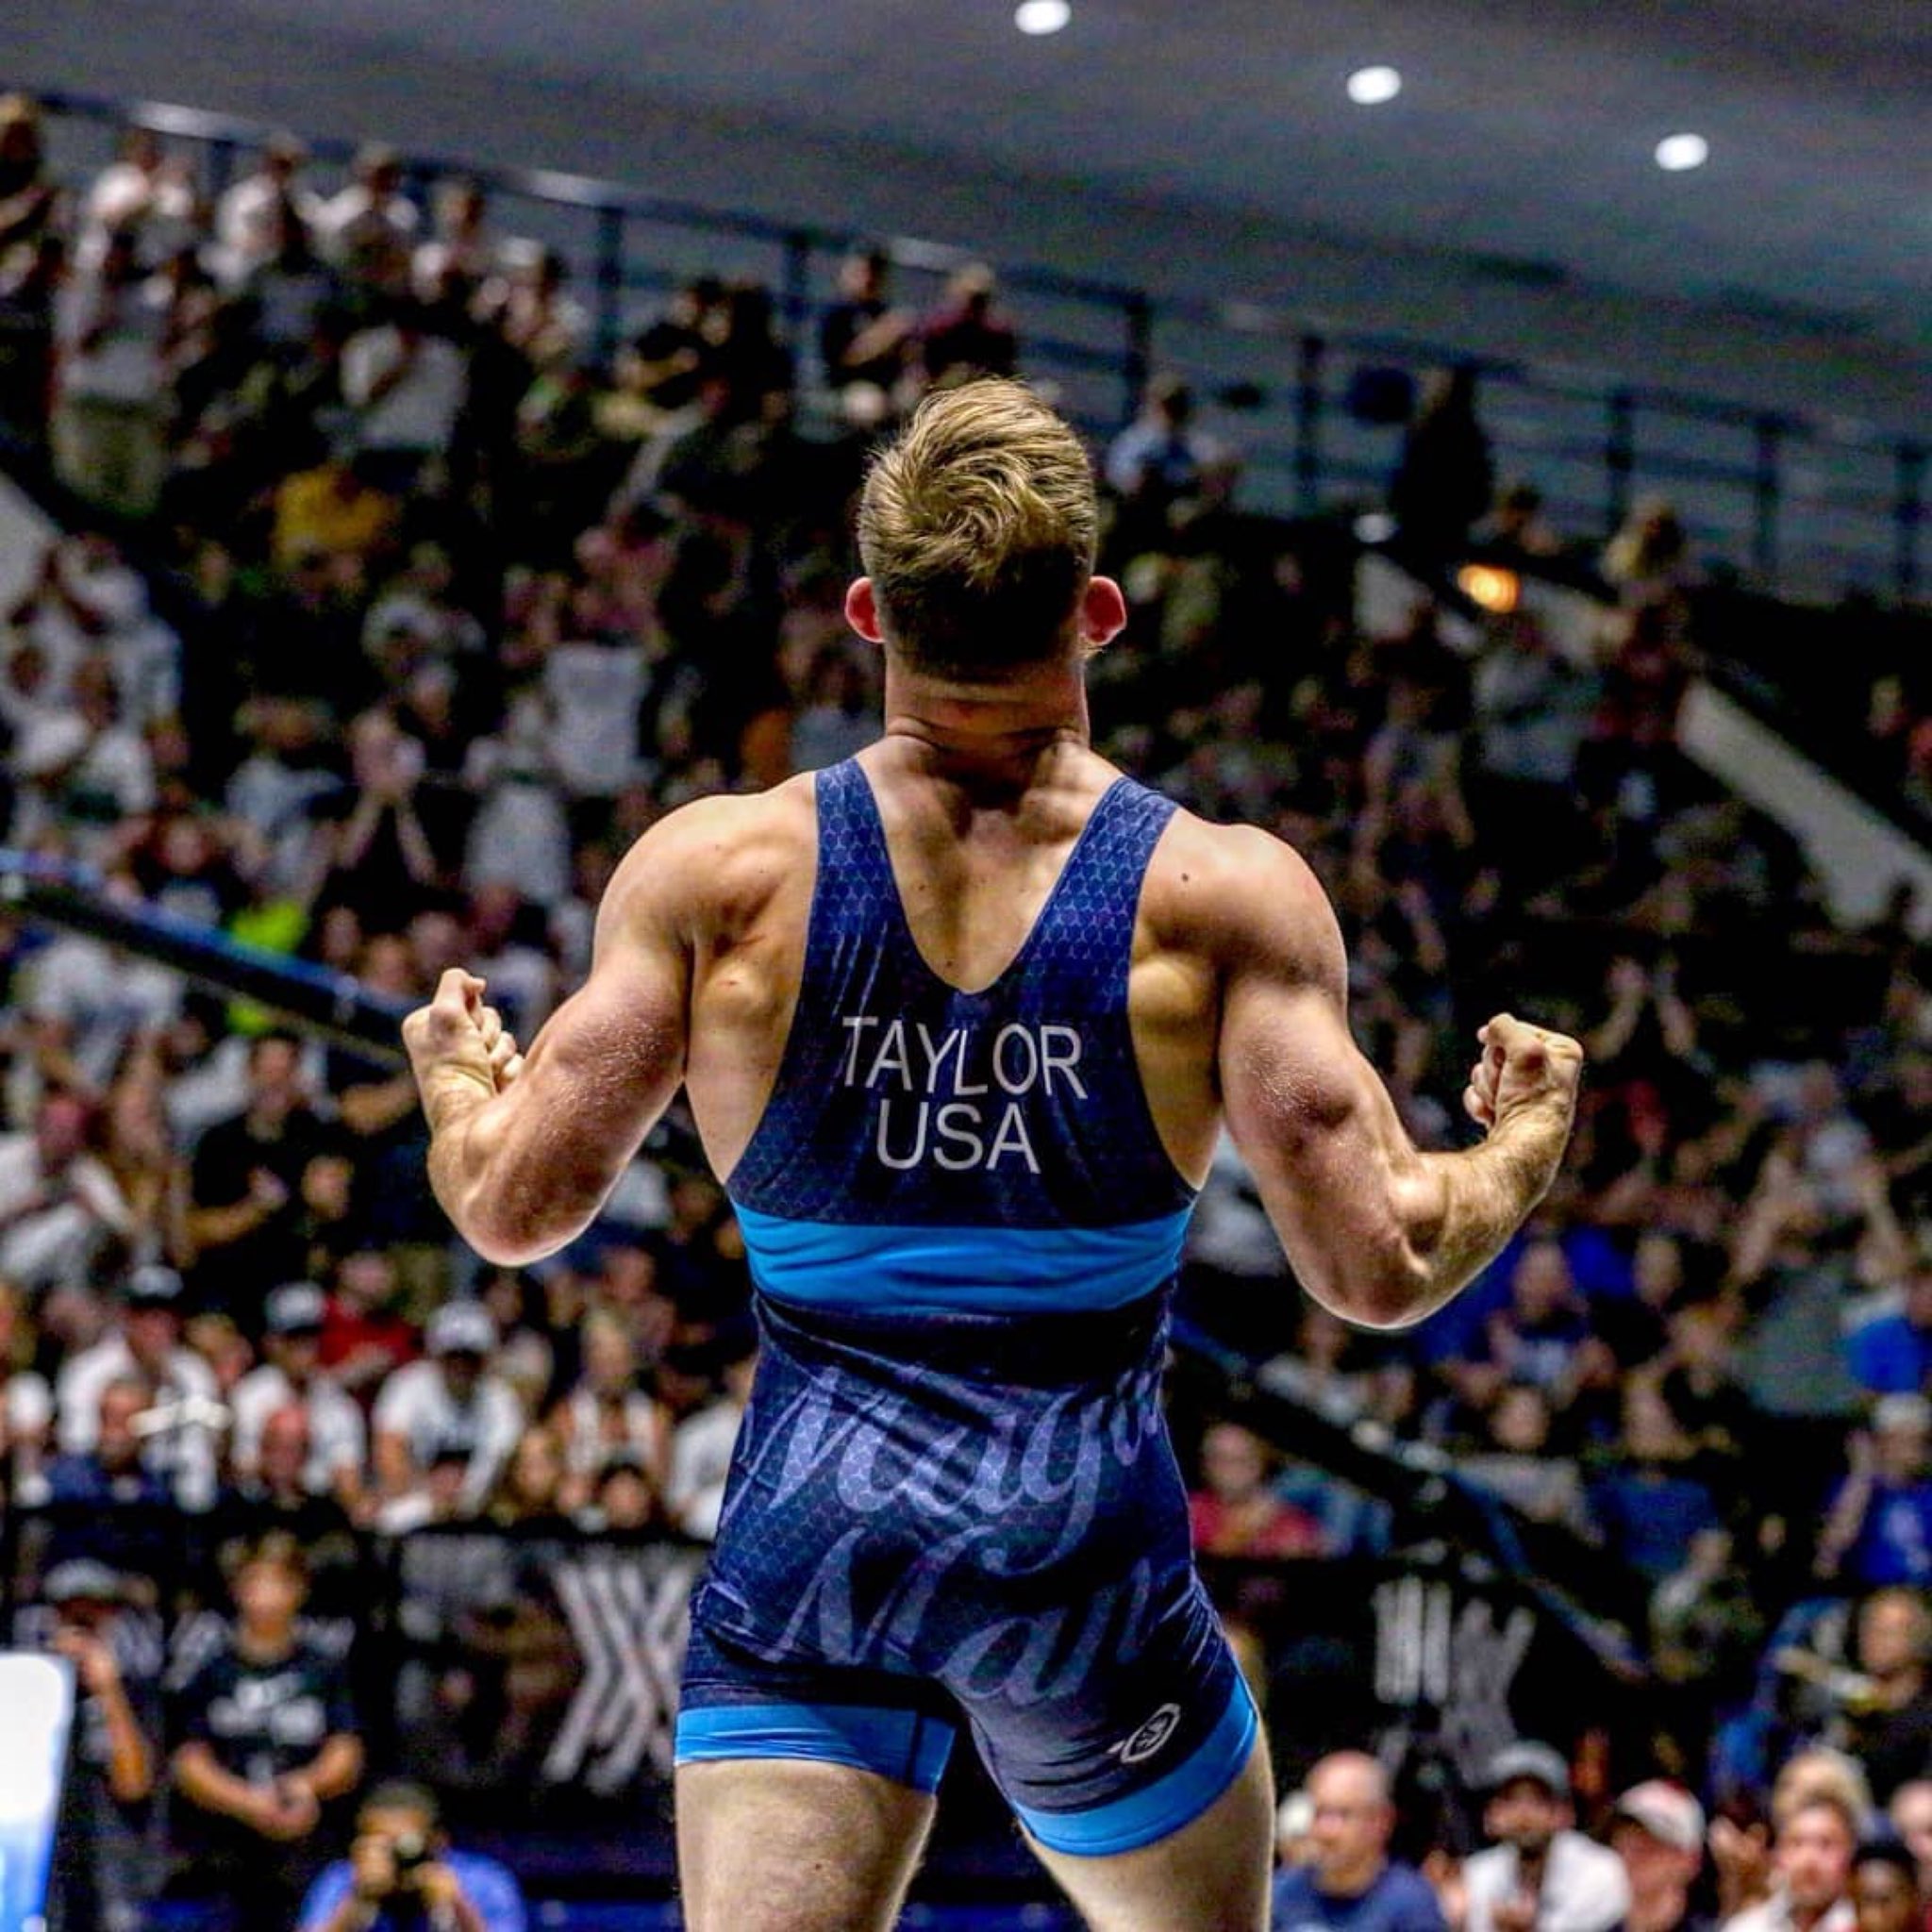 David Taylor 86kg World Team Member. Thank you for all of your support! Last night was absolutely amazing. It was also the first wrestling celebratory evening since NCAA's in